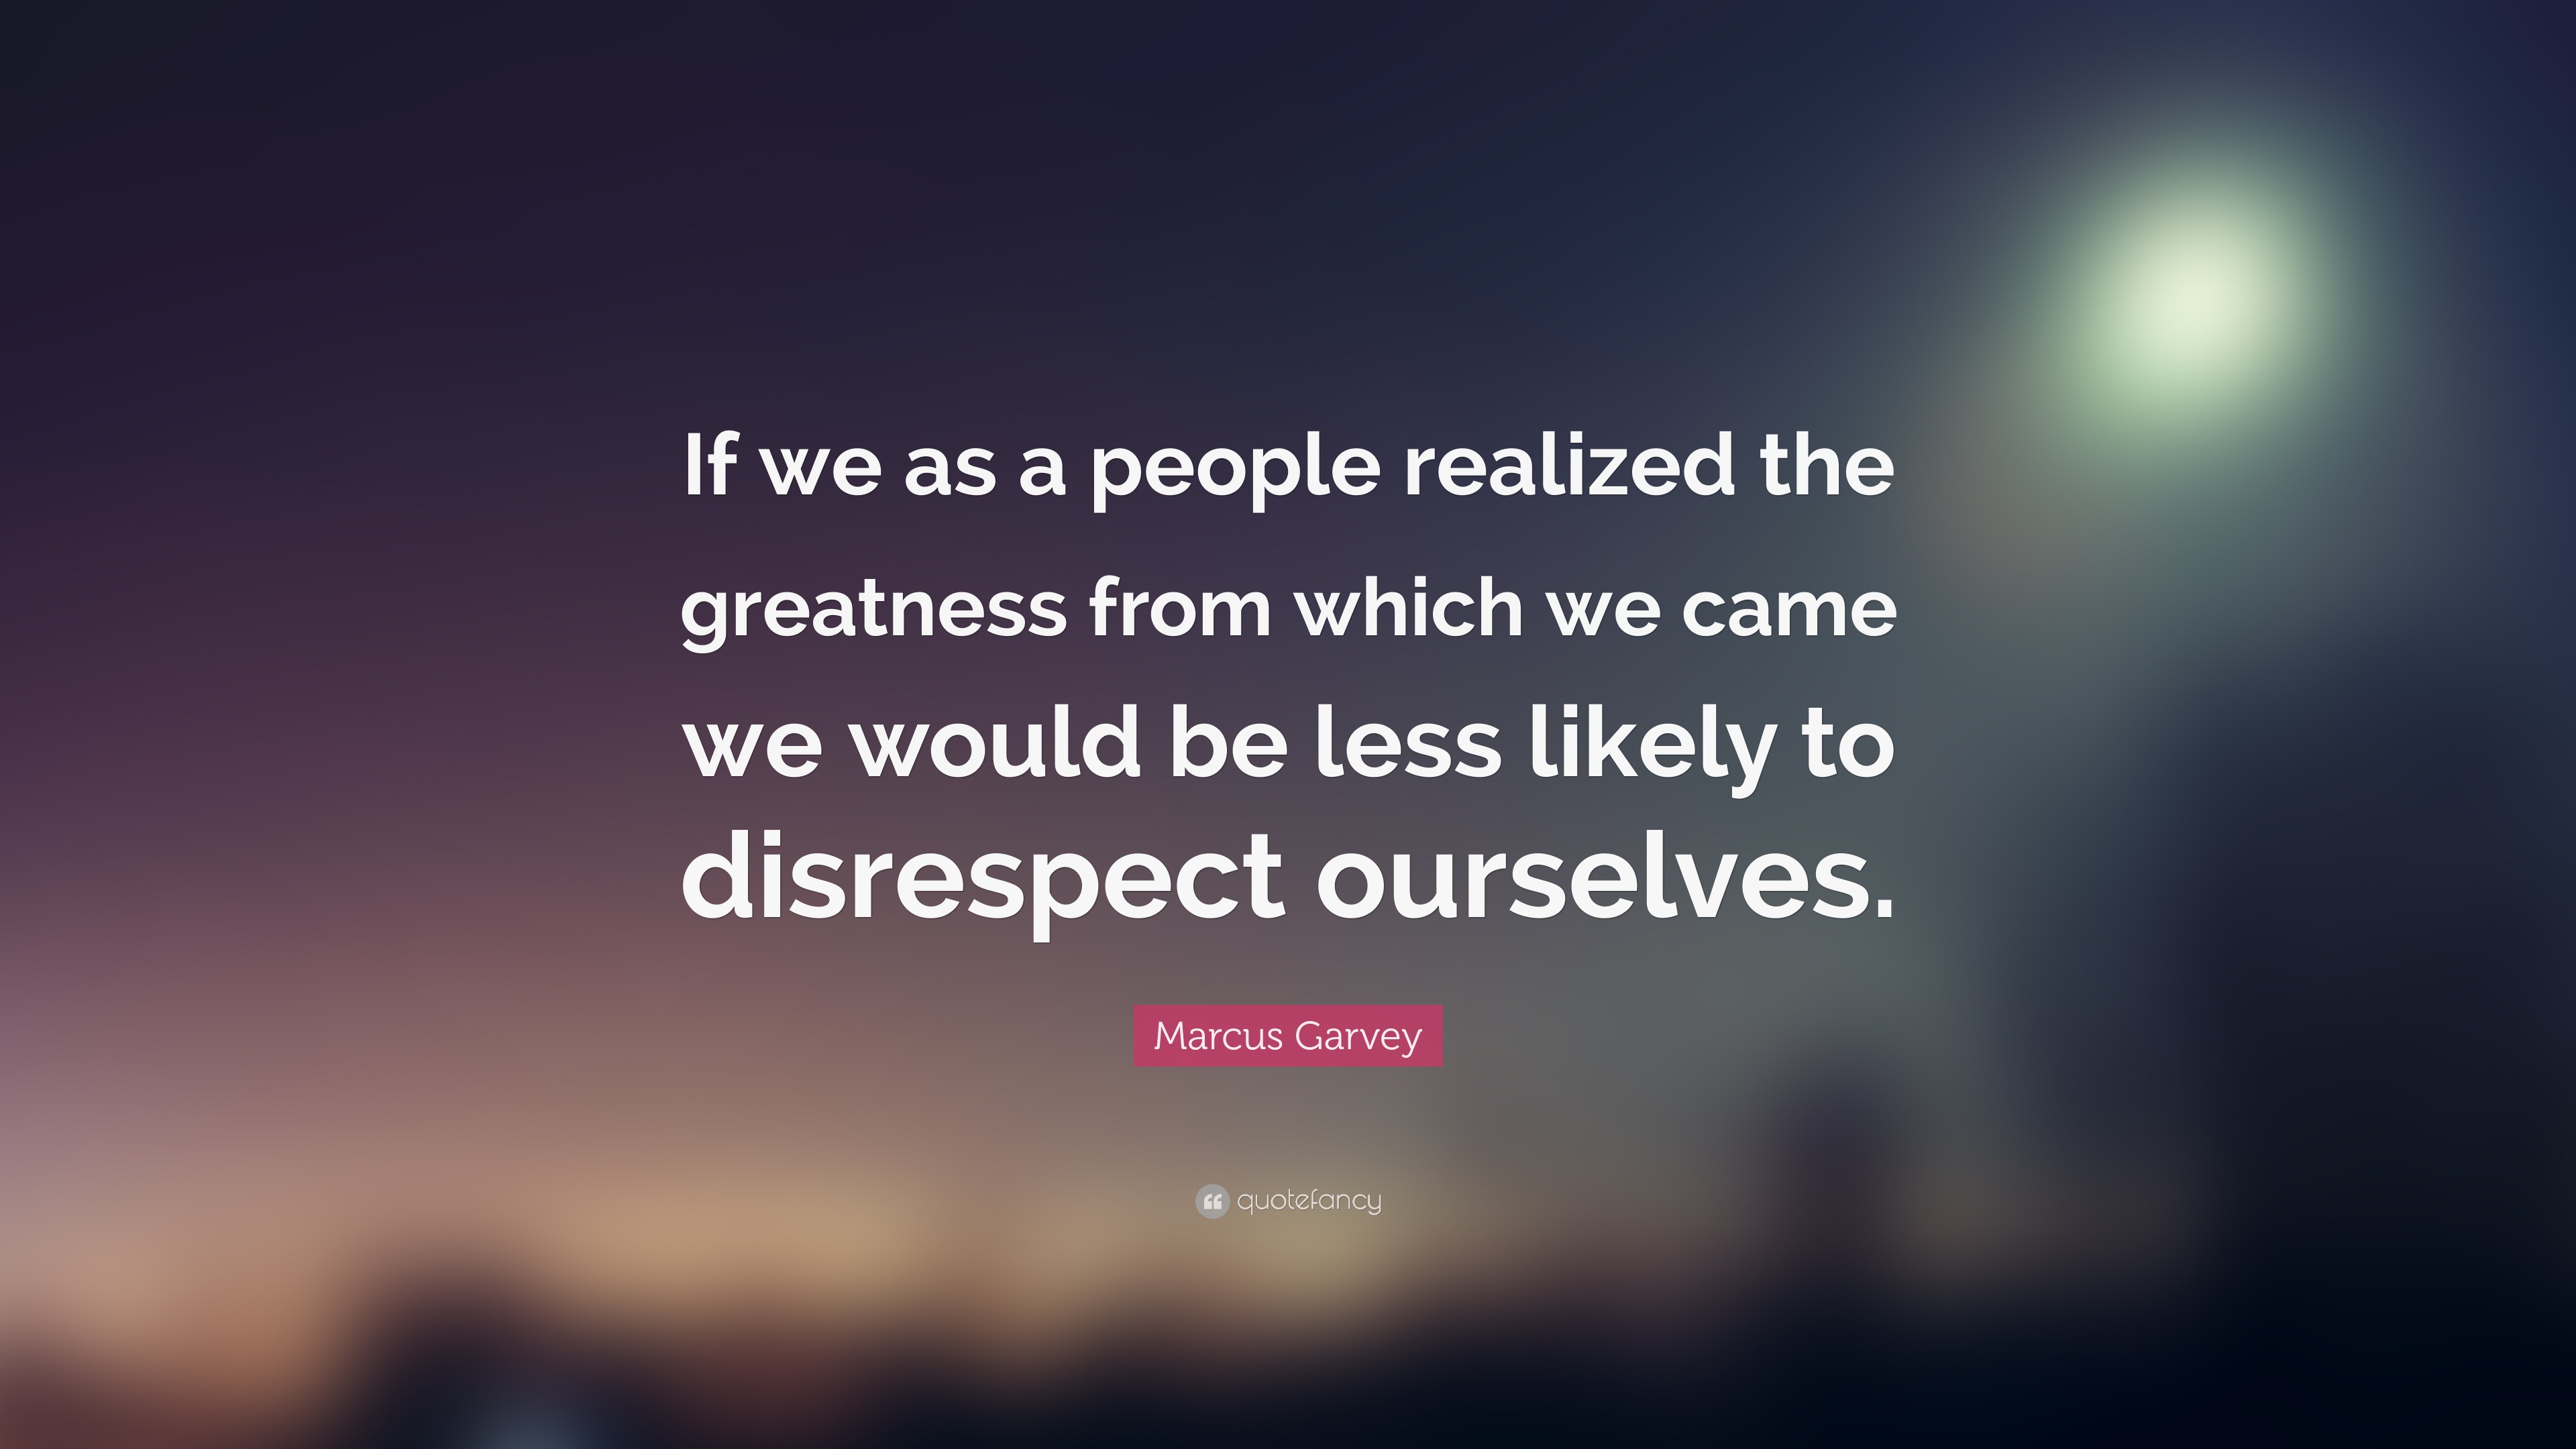 Marcus Garvey Quote: “If we as a people realized the greatness from ...